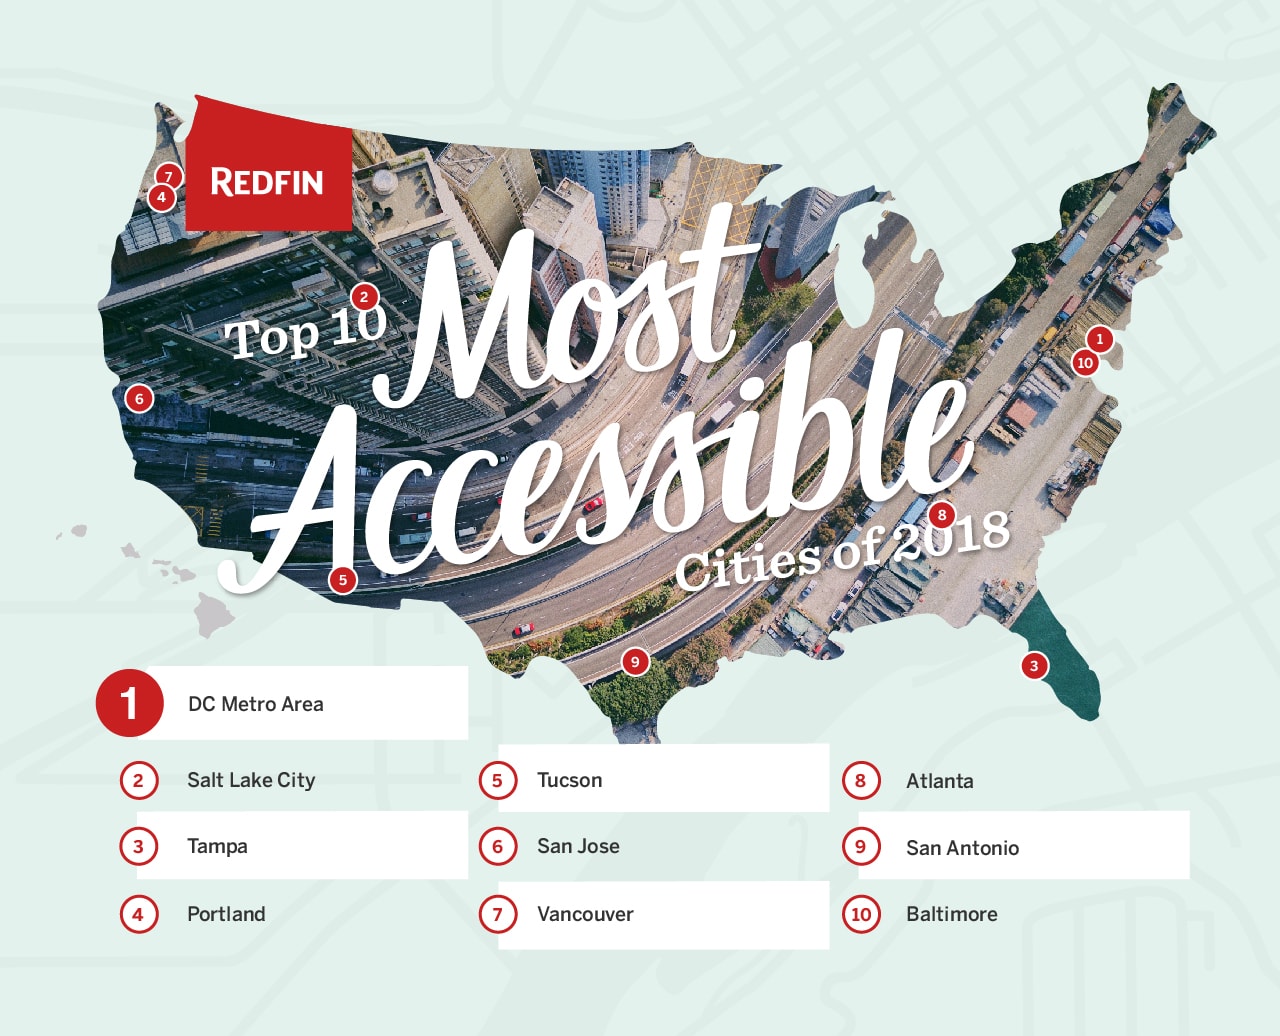 Redfin-MostAccessible-051418-1280x960 (1)